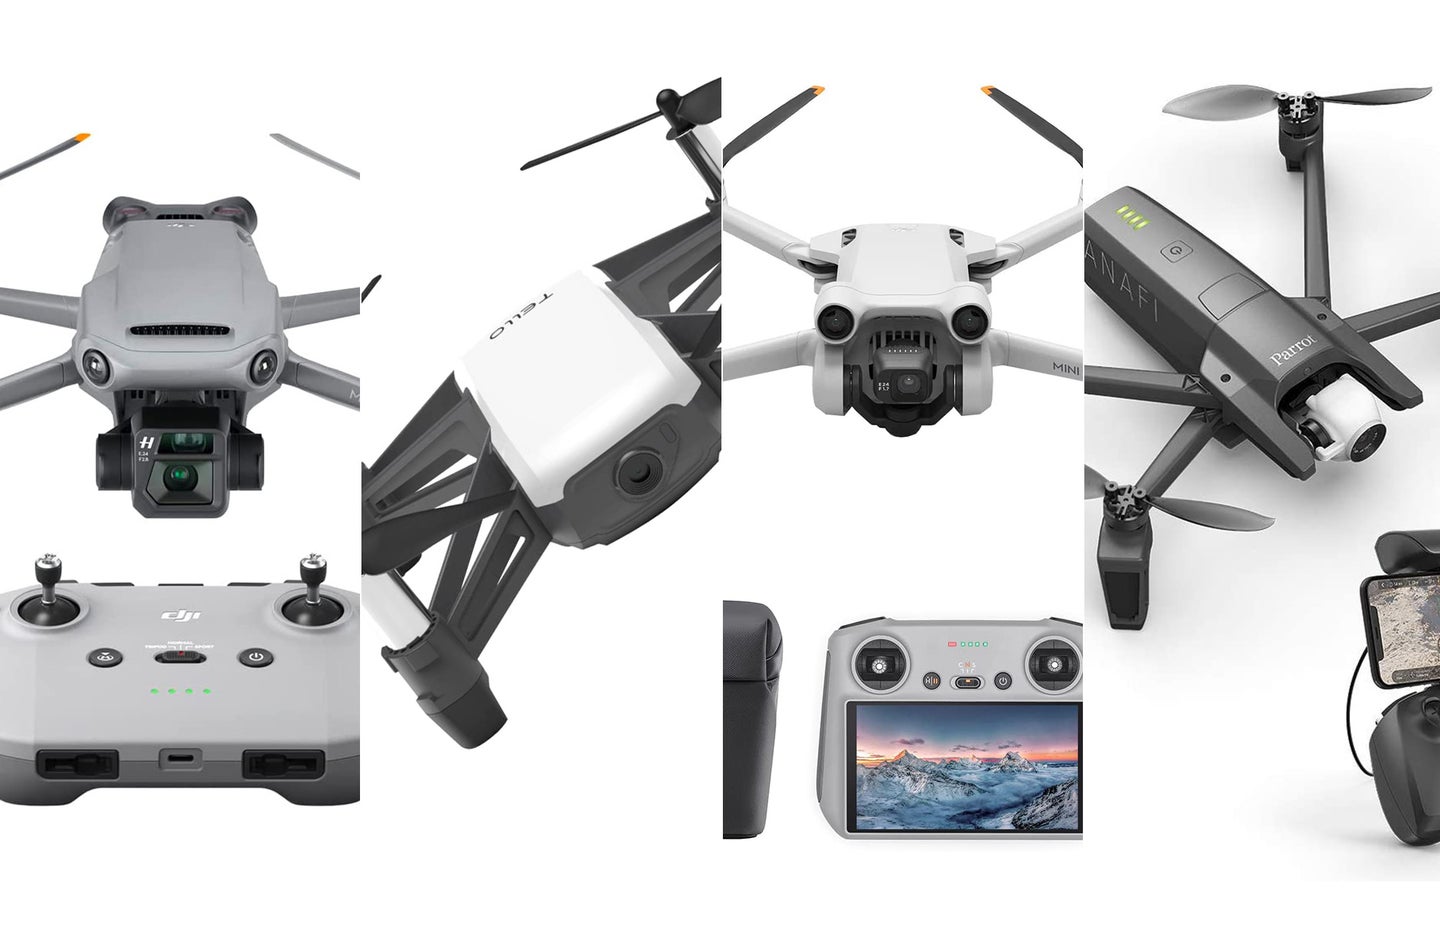 The best travel drones composited